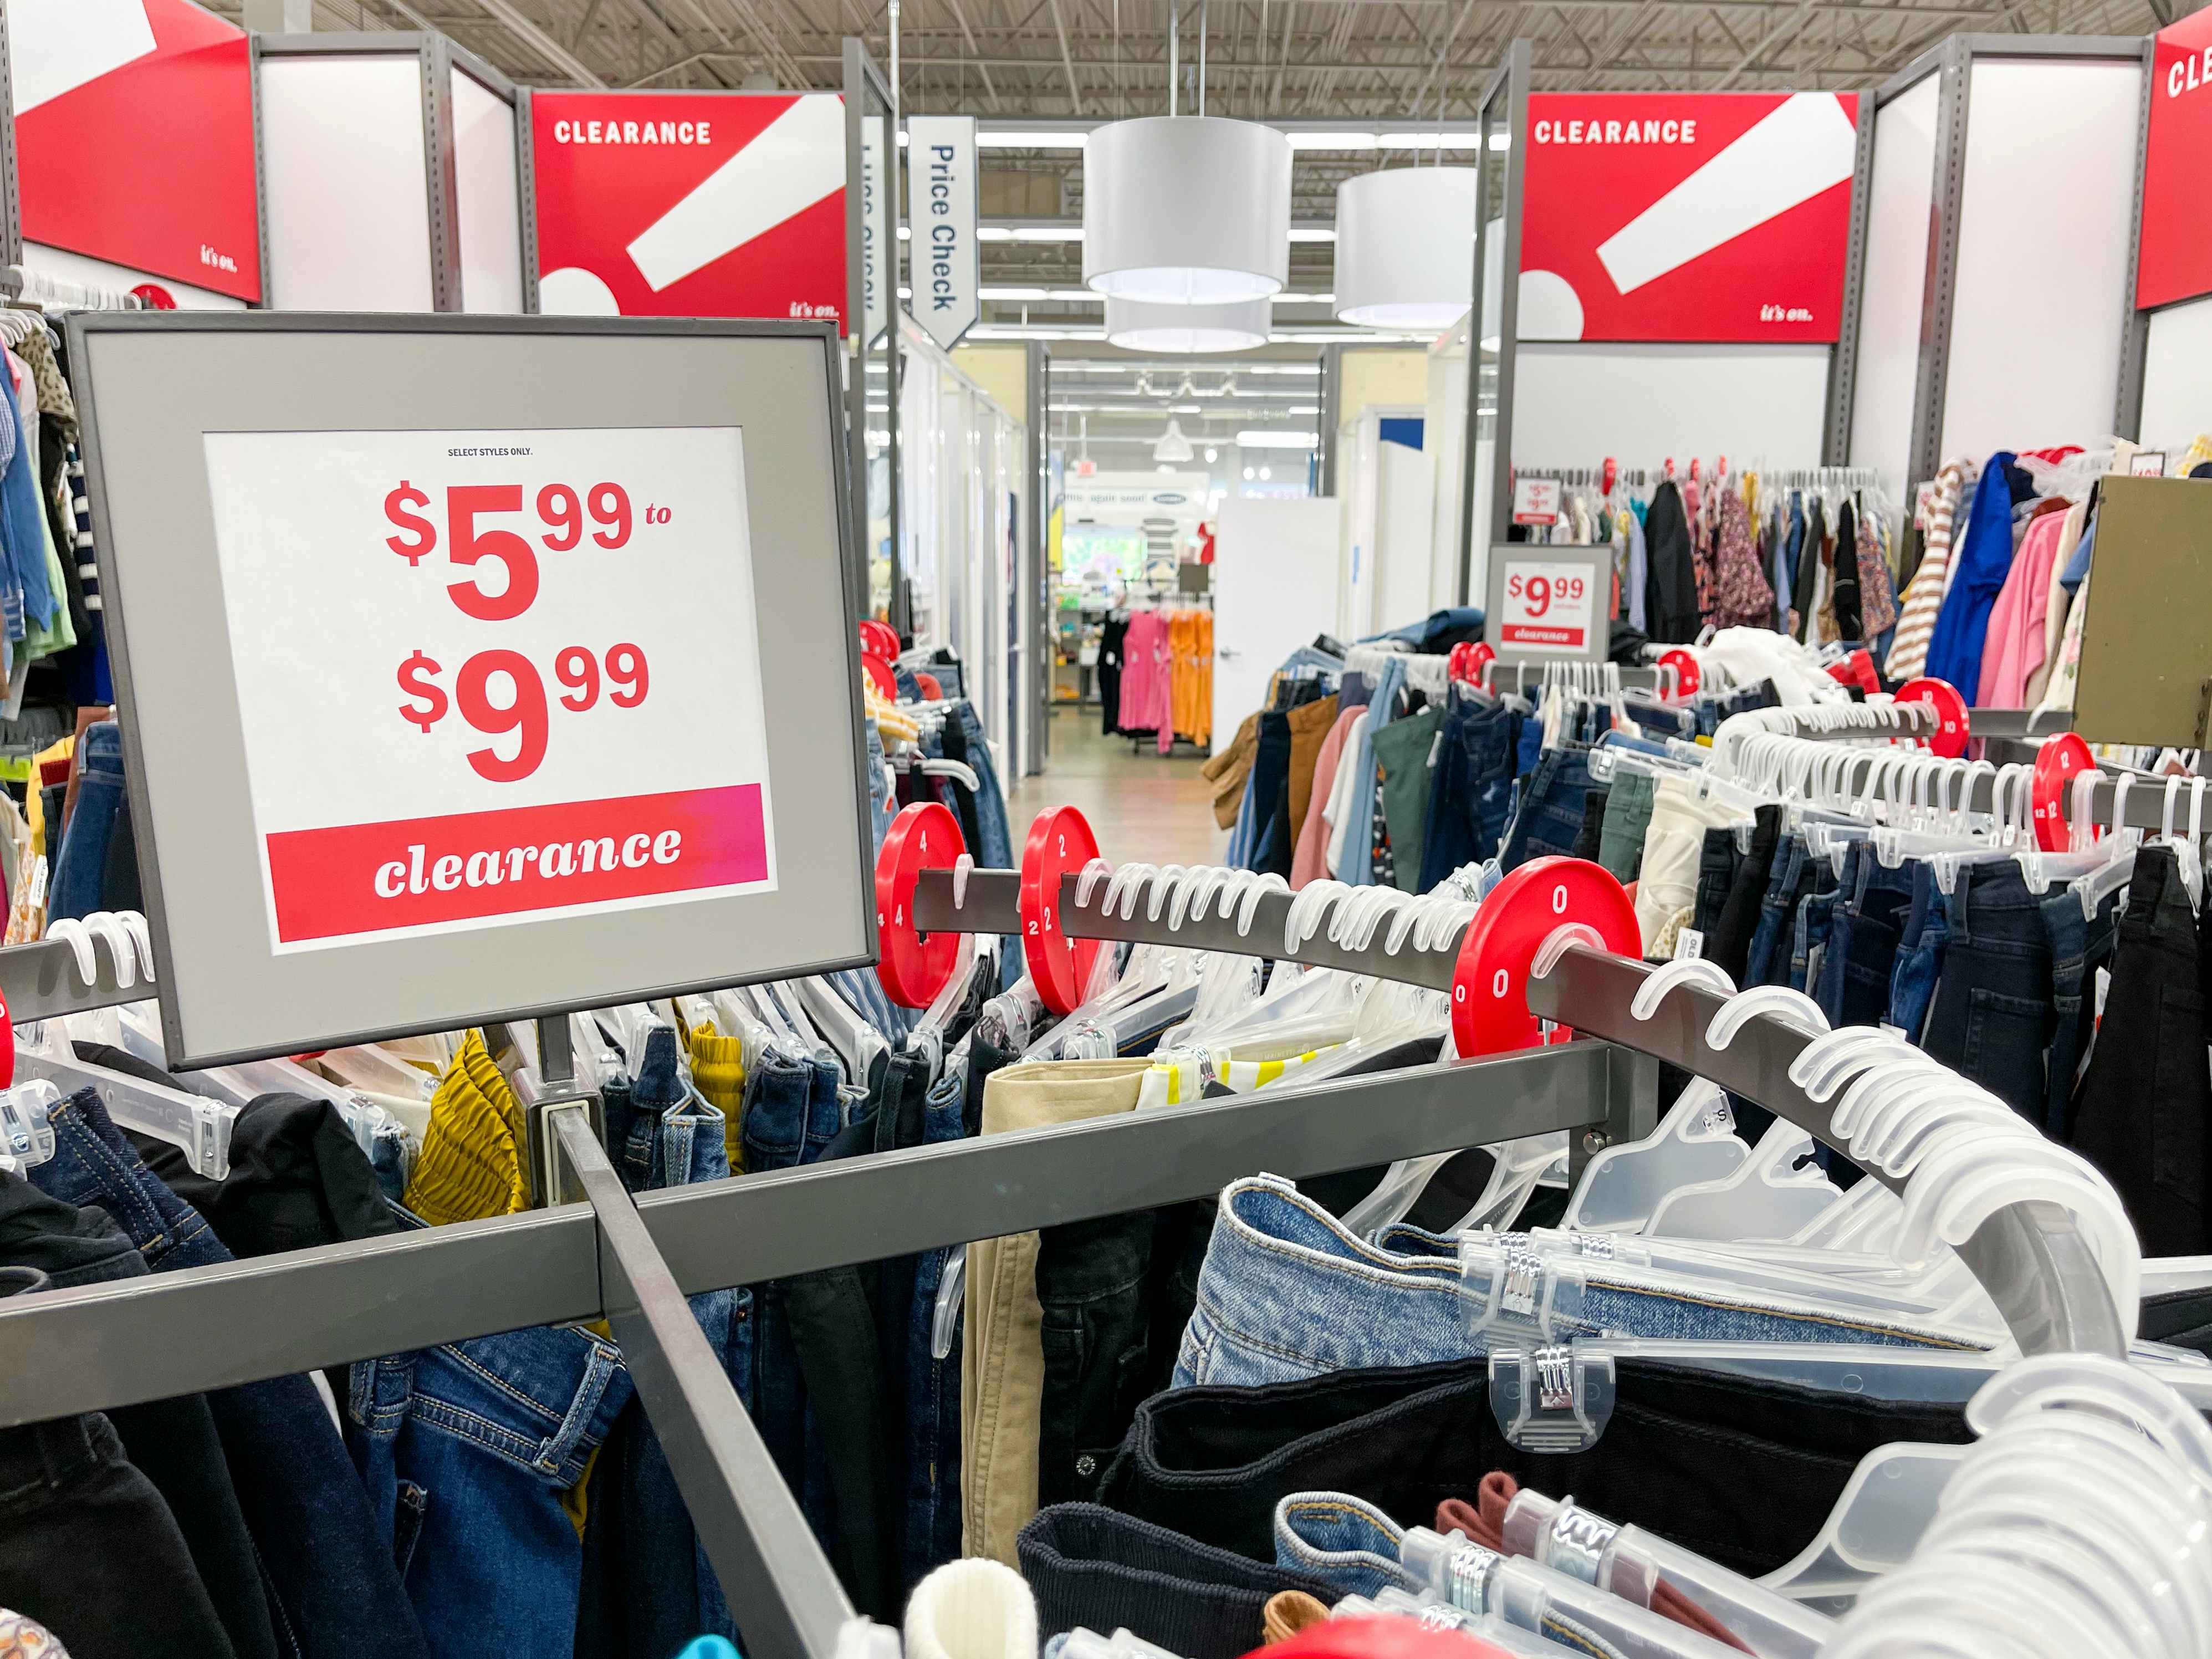 Old Navy clearance racks with sales signs indicating price points of $5.99 to $9.99.